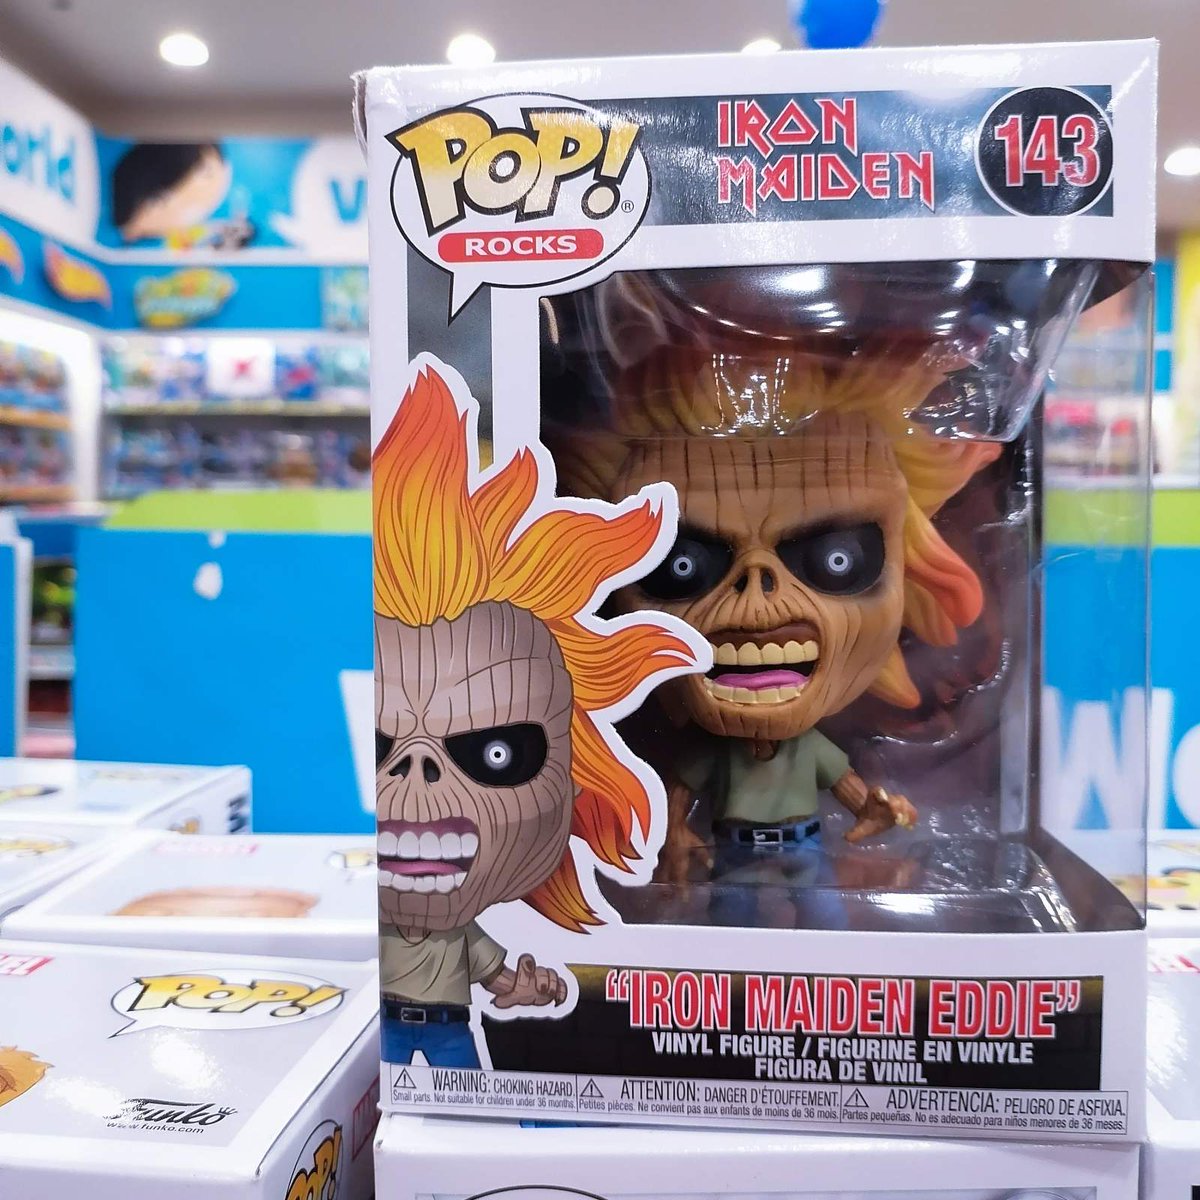 Run to the hills, run for your lives!

#IronMaiden  
#runtothehills 
#FunkoPops 
#toysrus 
#harborpoint 
#subicbay